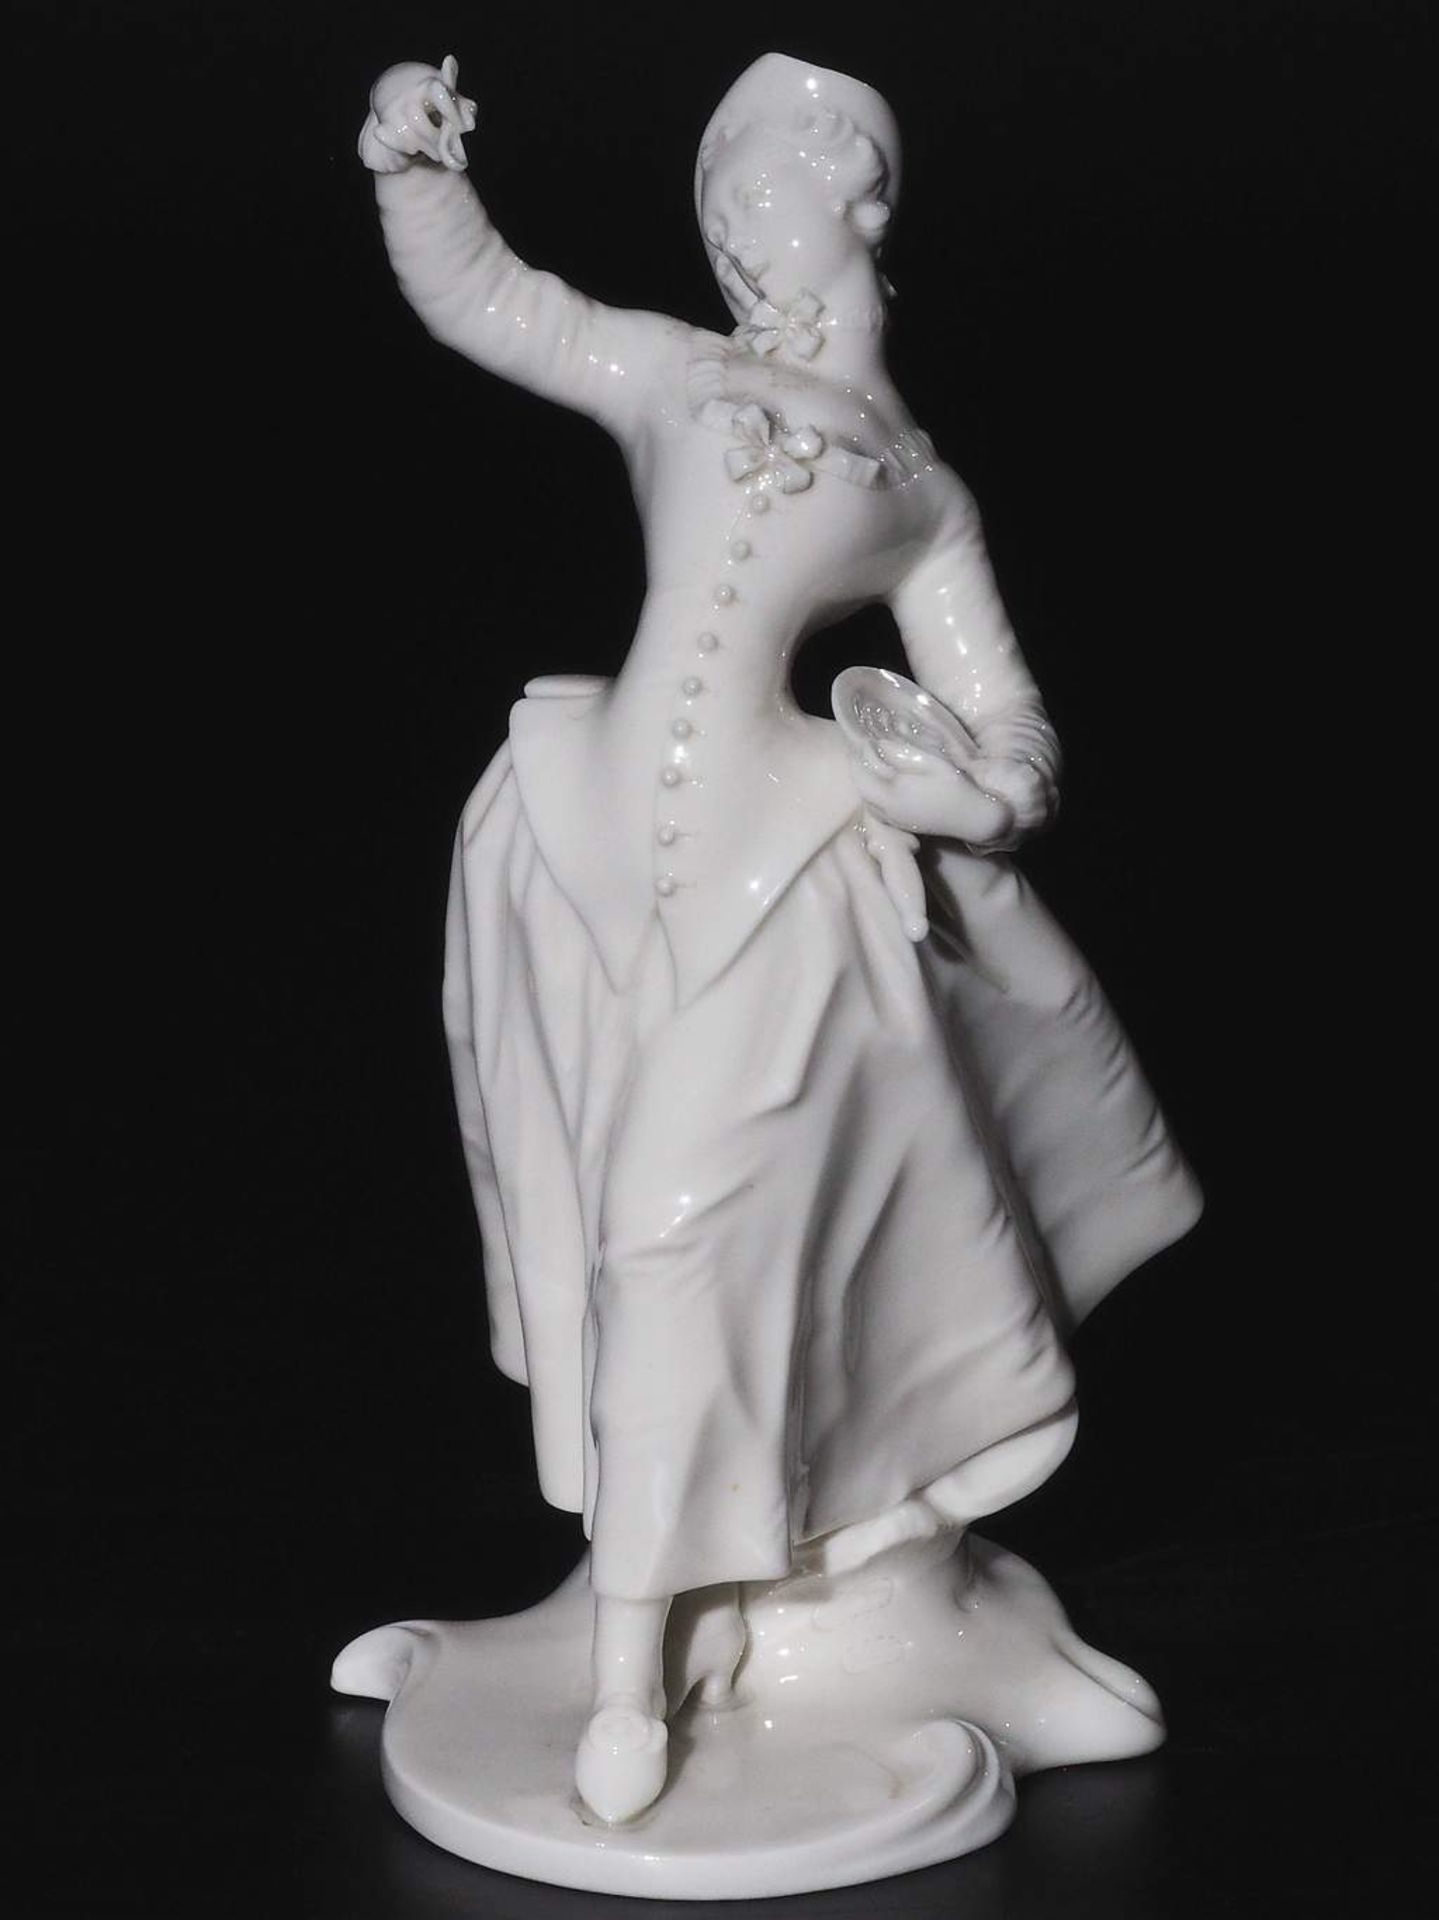 Nymphenburg Busttelli-Figur "Lalage", Commedia dell'Arte - Image 6 of 8